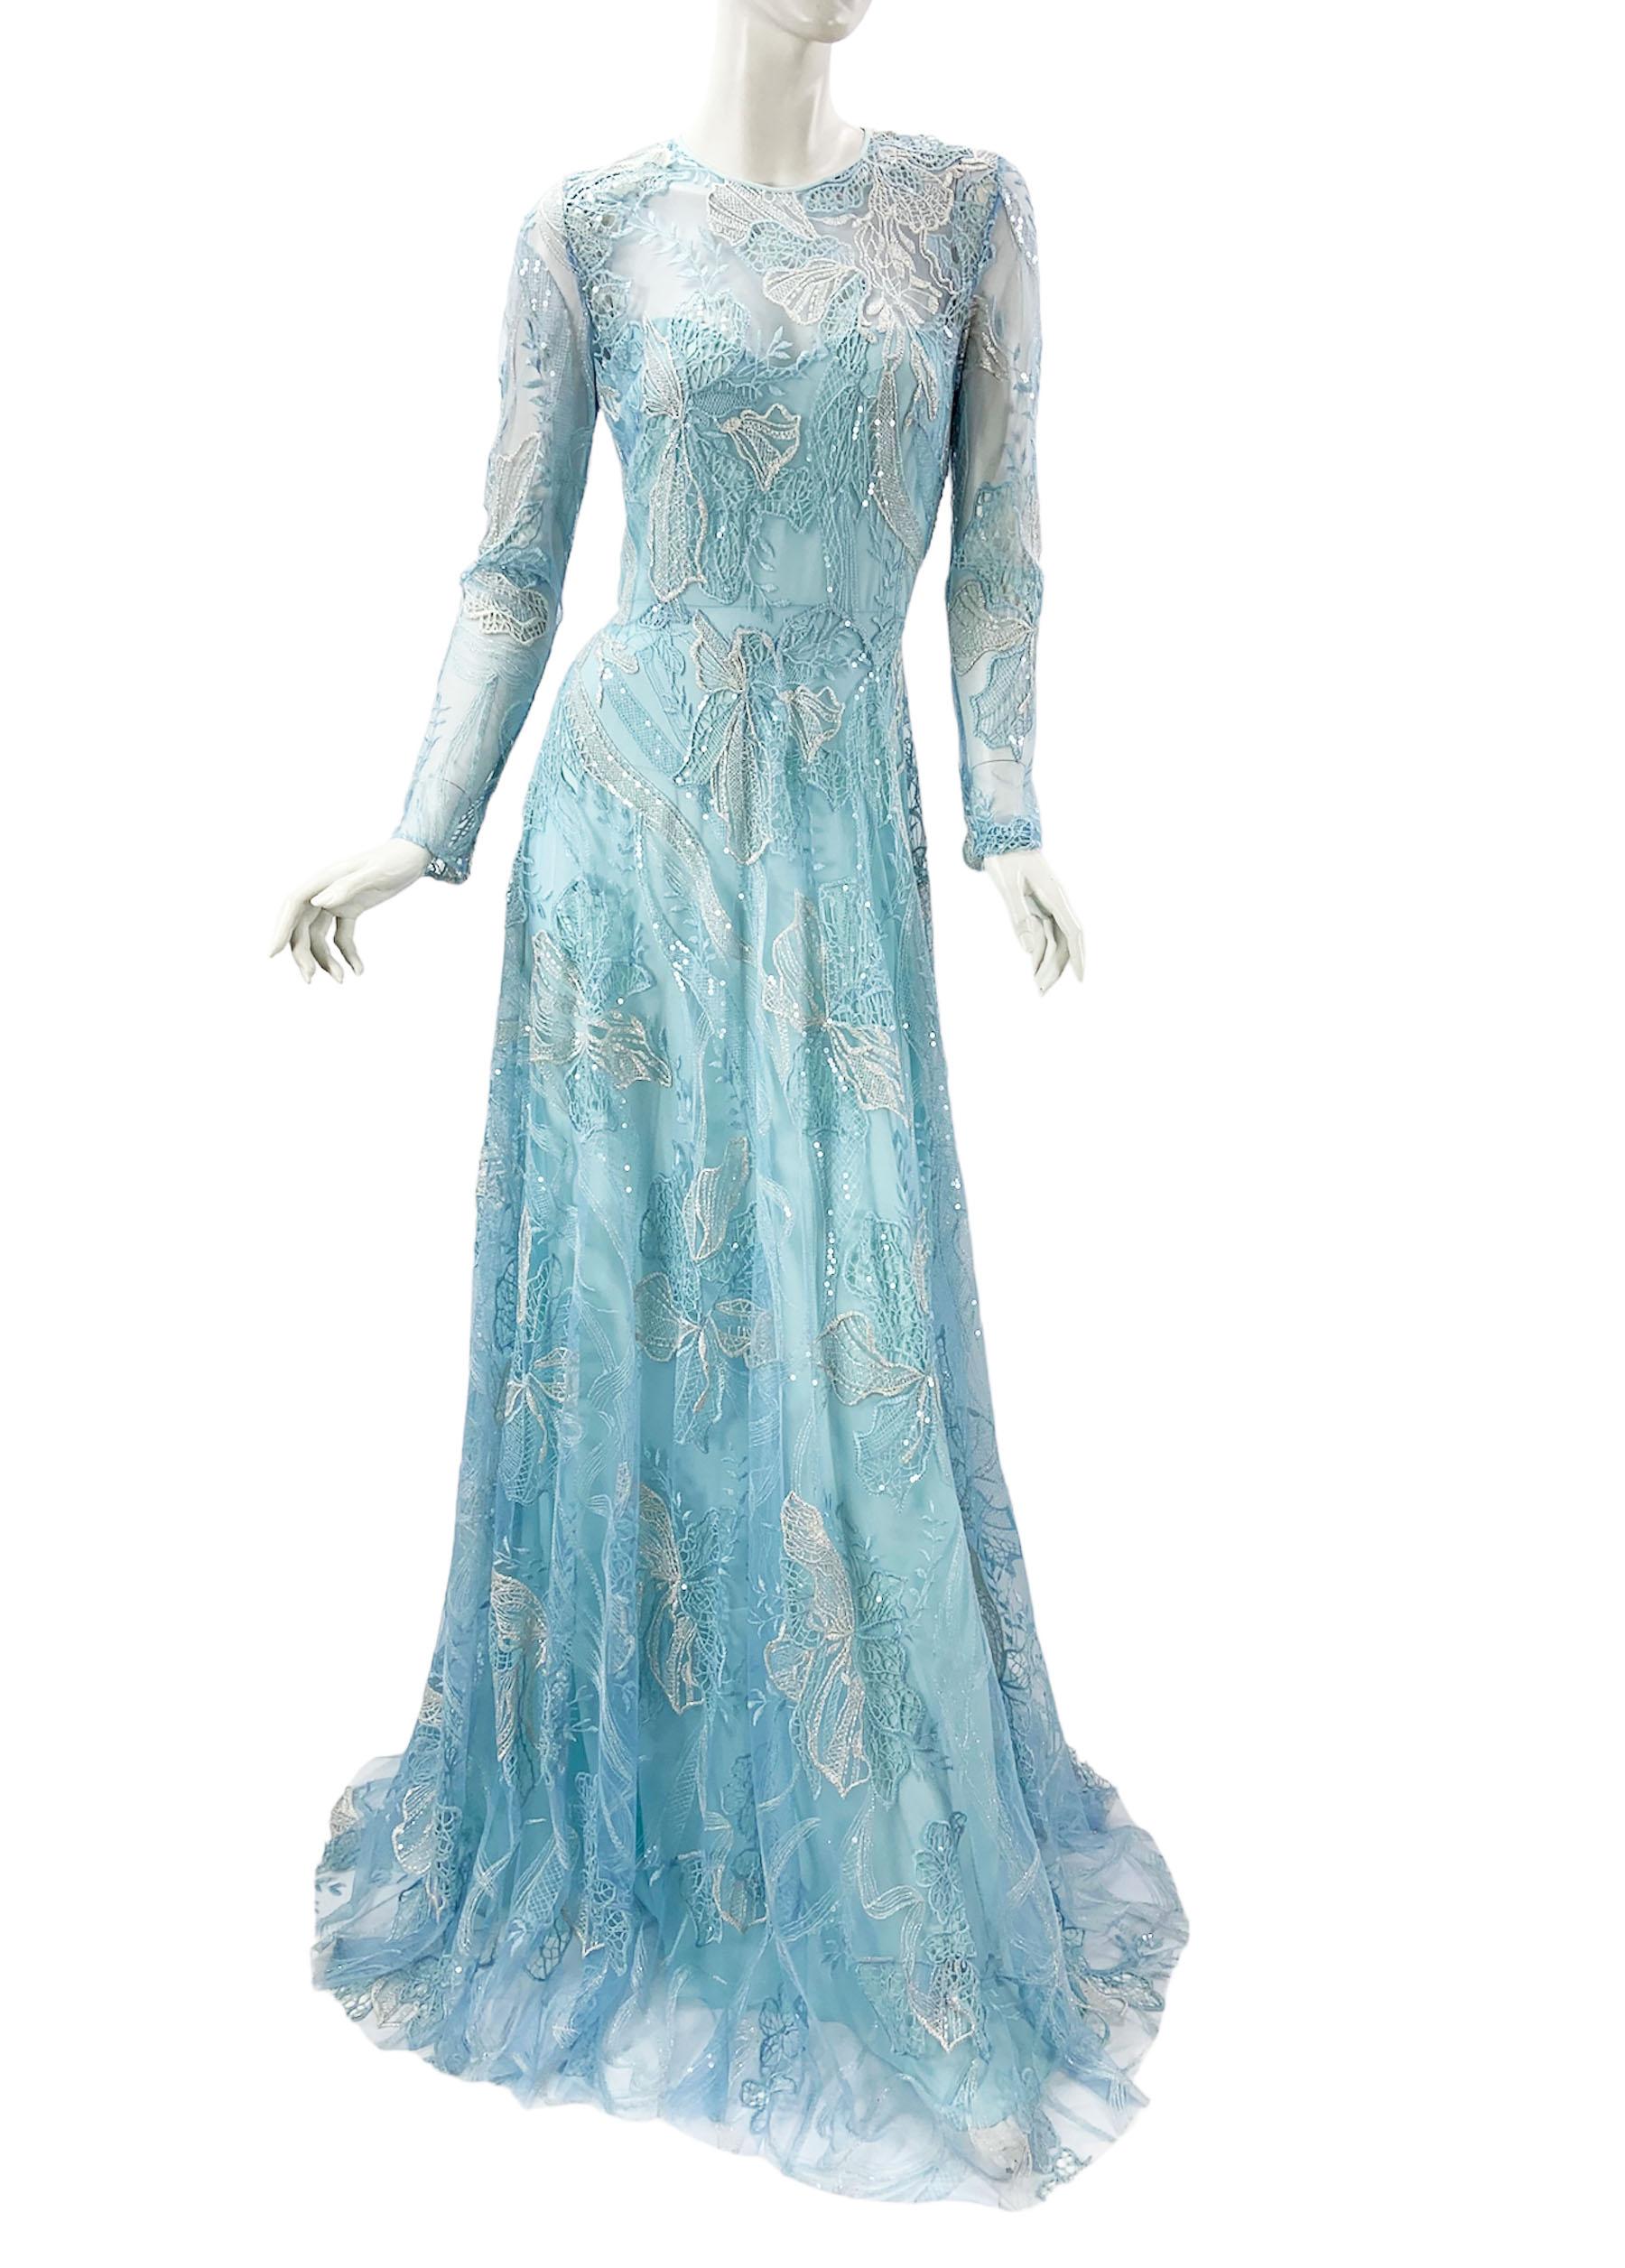 Naeem Khan Blue Lace Embellished Maxi Dress Gown
US size - 4
Blue tulle embellished with white/silver metallic and blue floral embroidery, clear sequins.
Fully lined in silk, Back zip closure.
Measurements: Length - 66 inches, Bust - 32/34